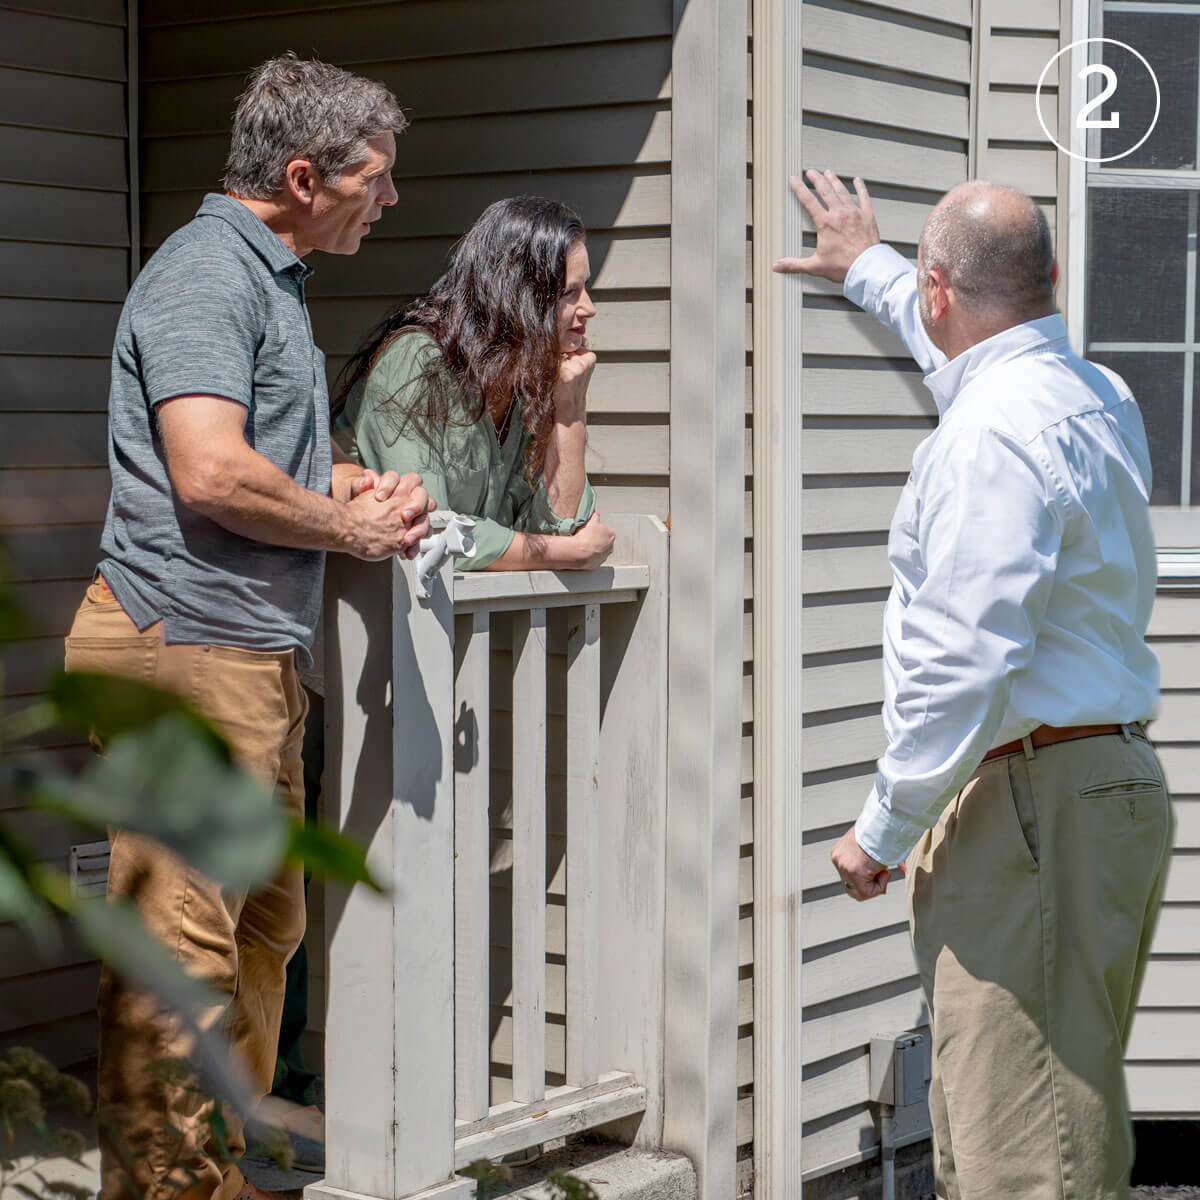 LeafFilter employee discussing installation options with husband and wife